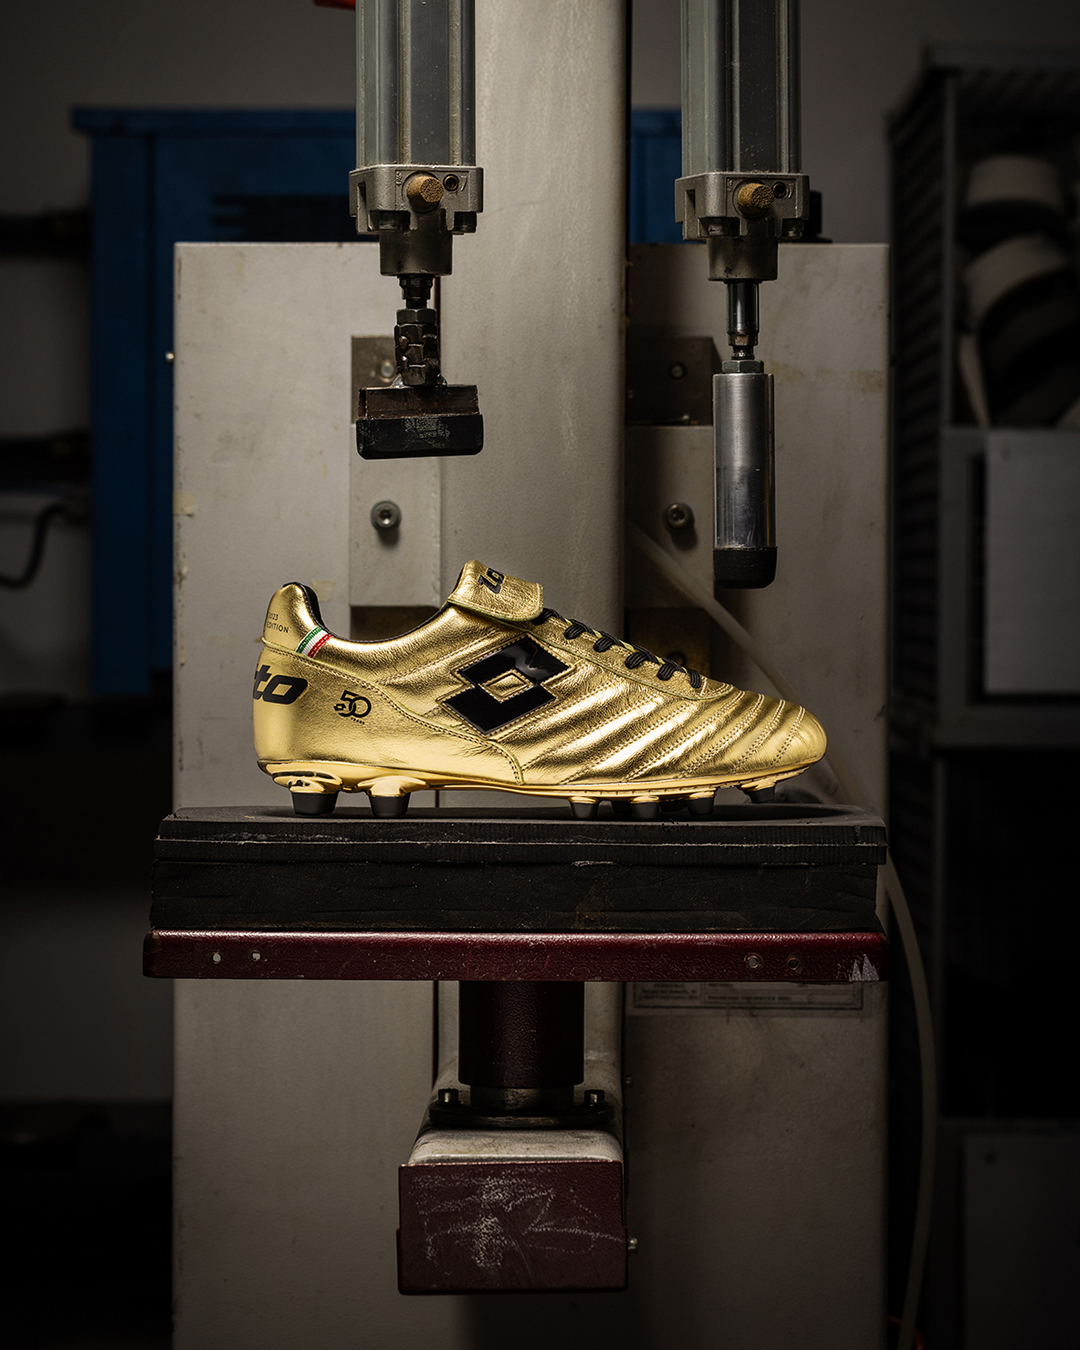 LOTTO SPORT ITALIA CELEBRATES 50 YEARS WITH FOUR EXCLUSIVE SHOES